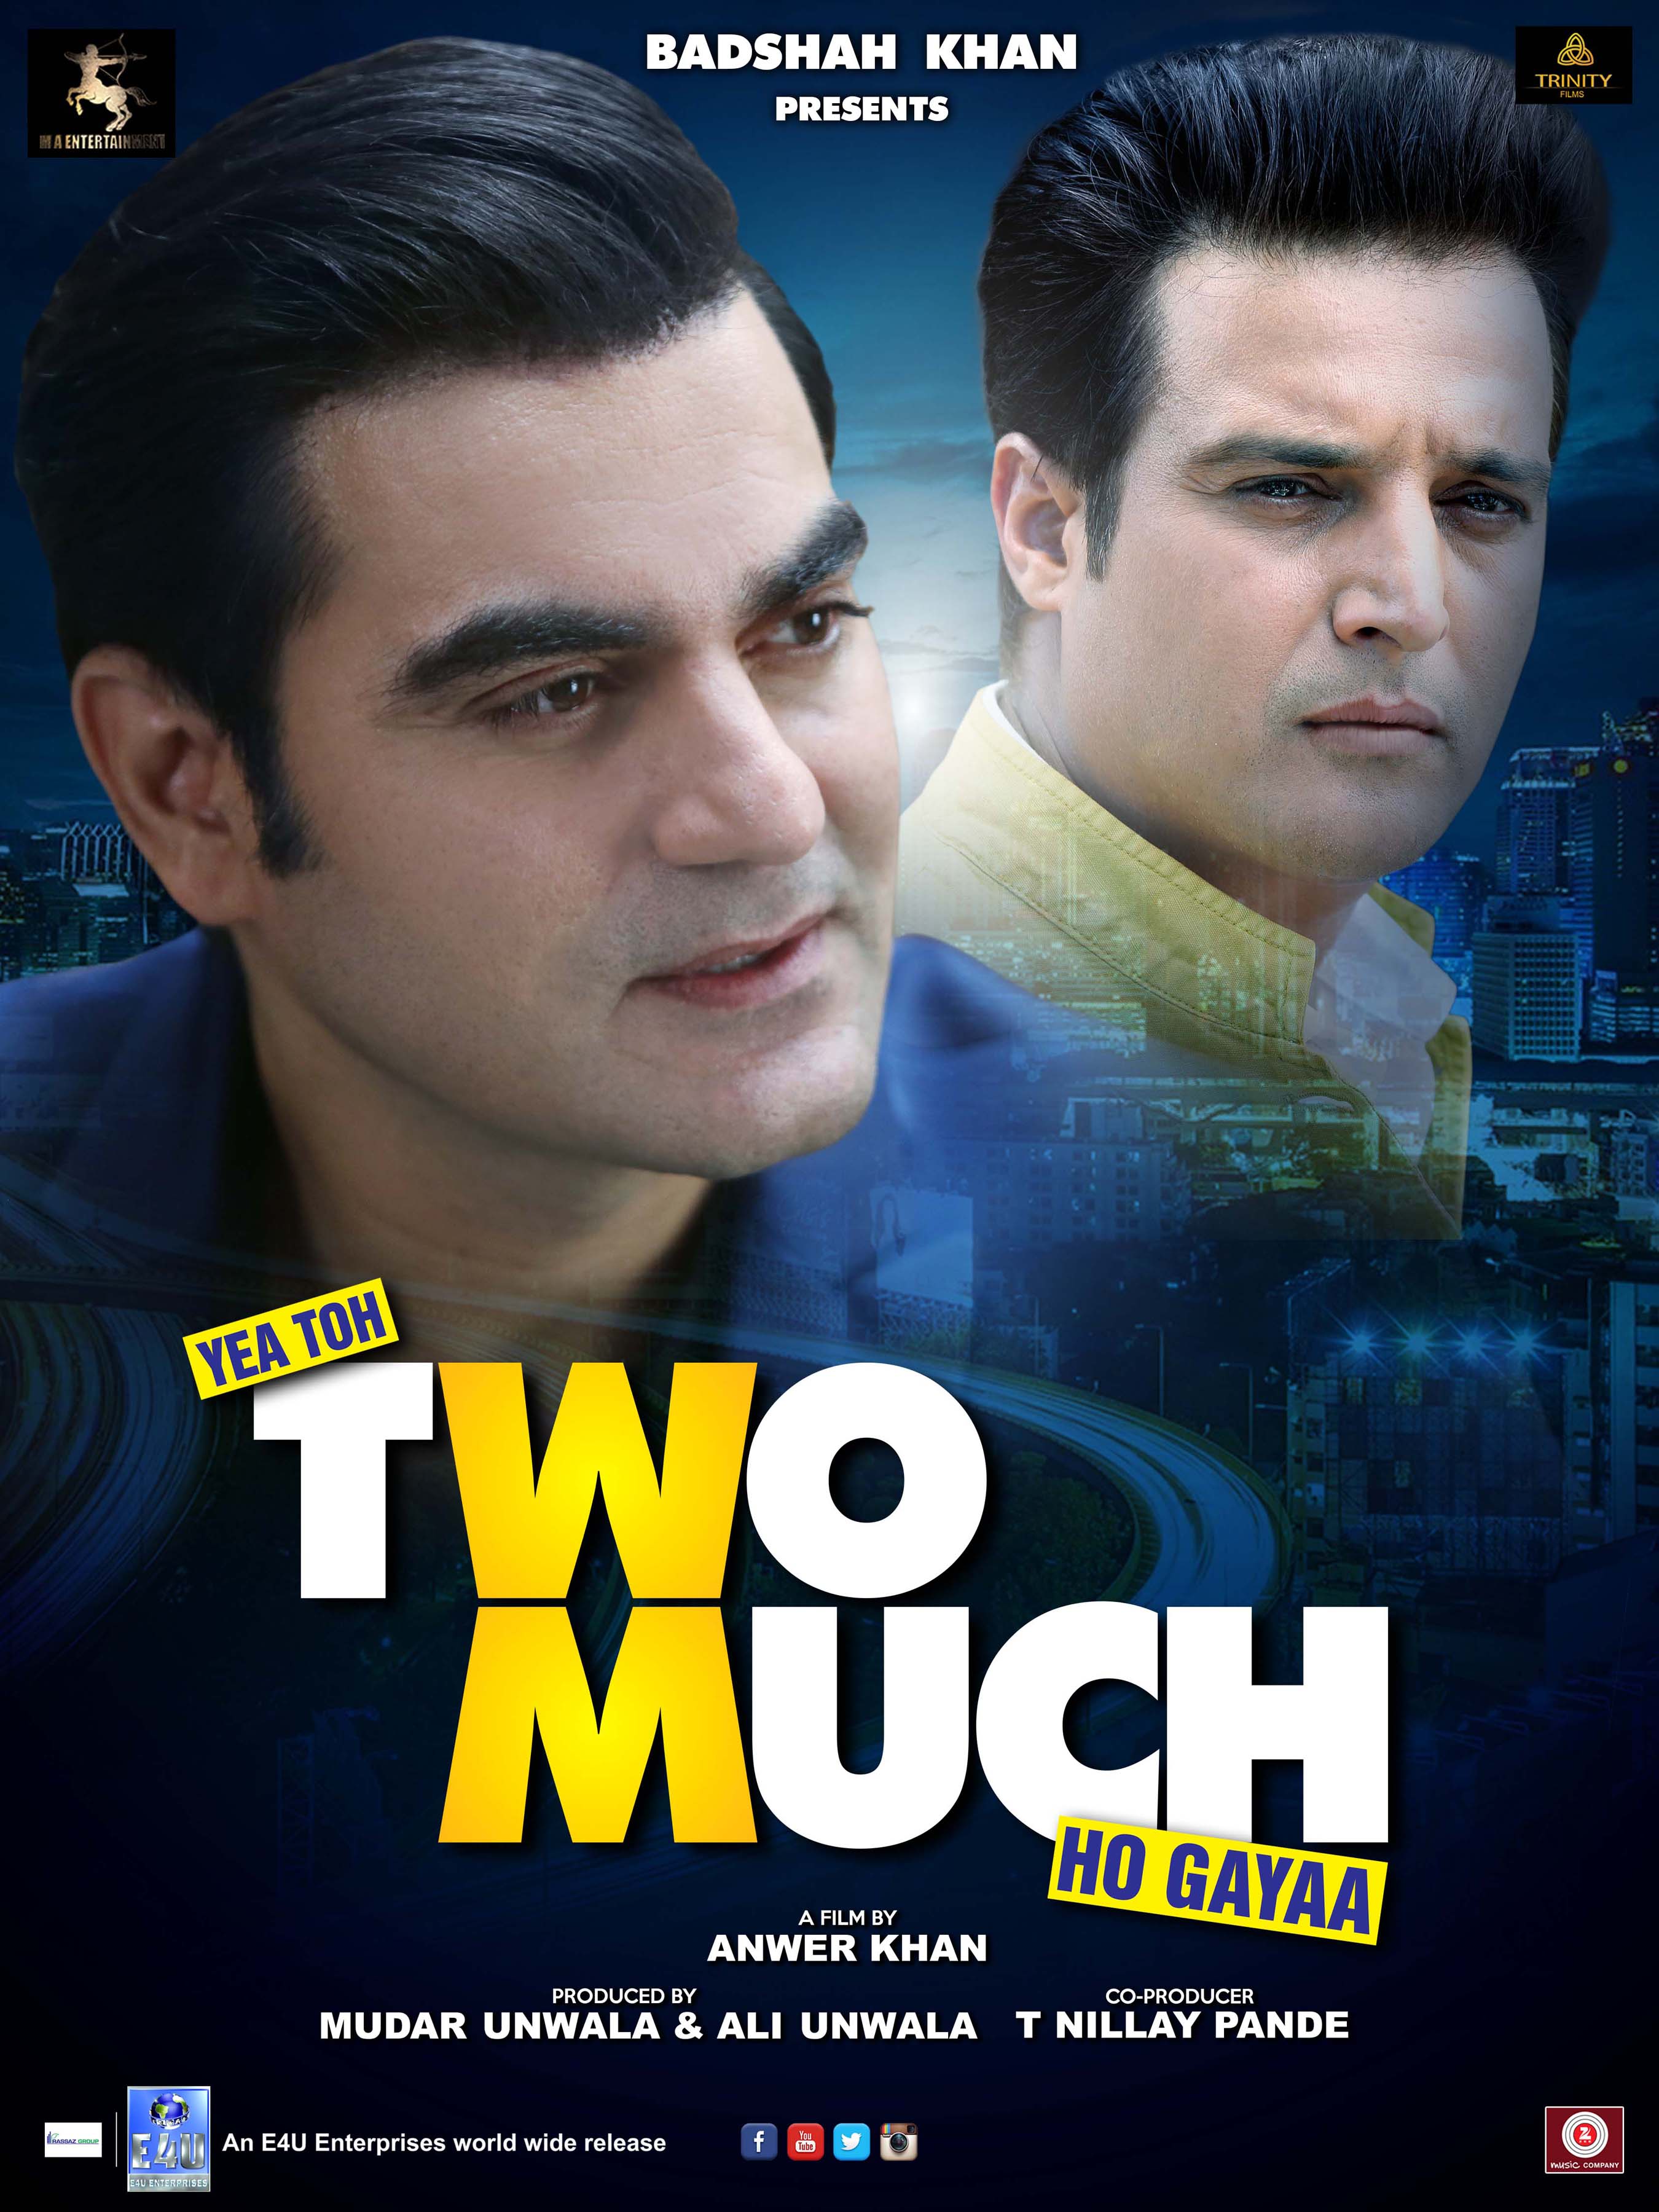 Yea Toh Two Much Ho Gayaa (2016) First Look Poster